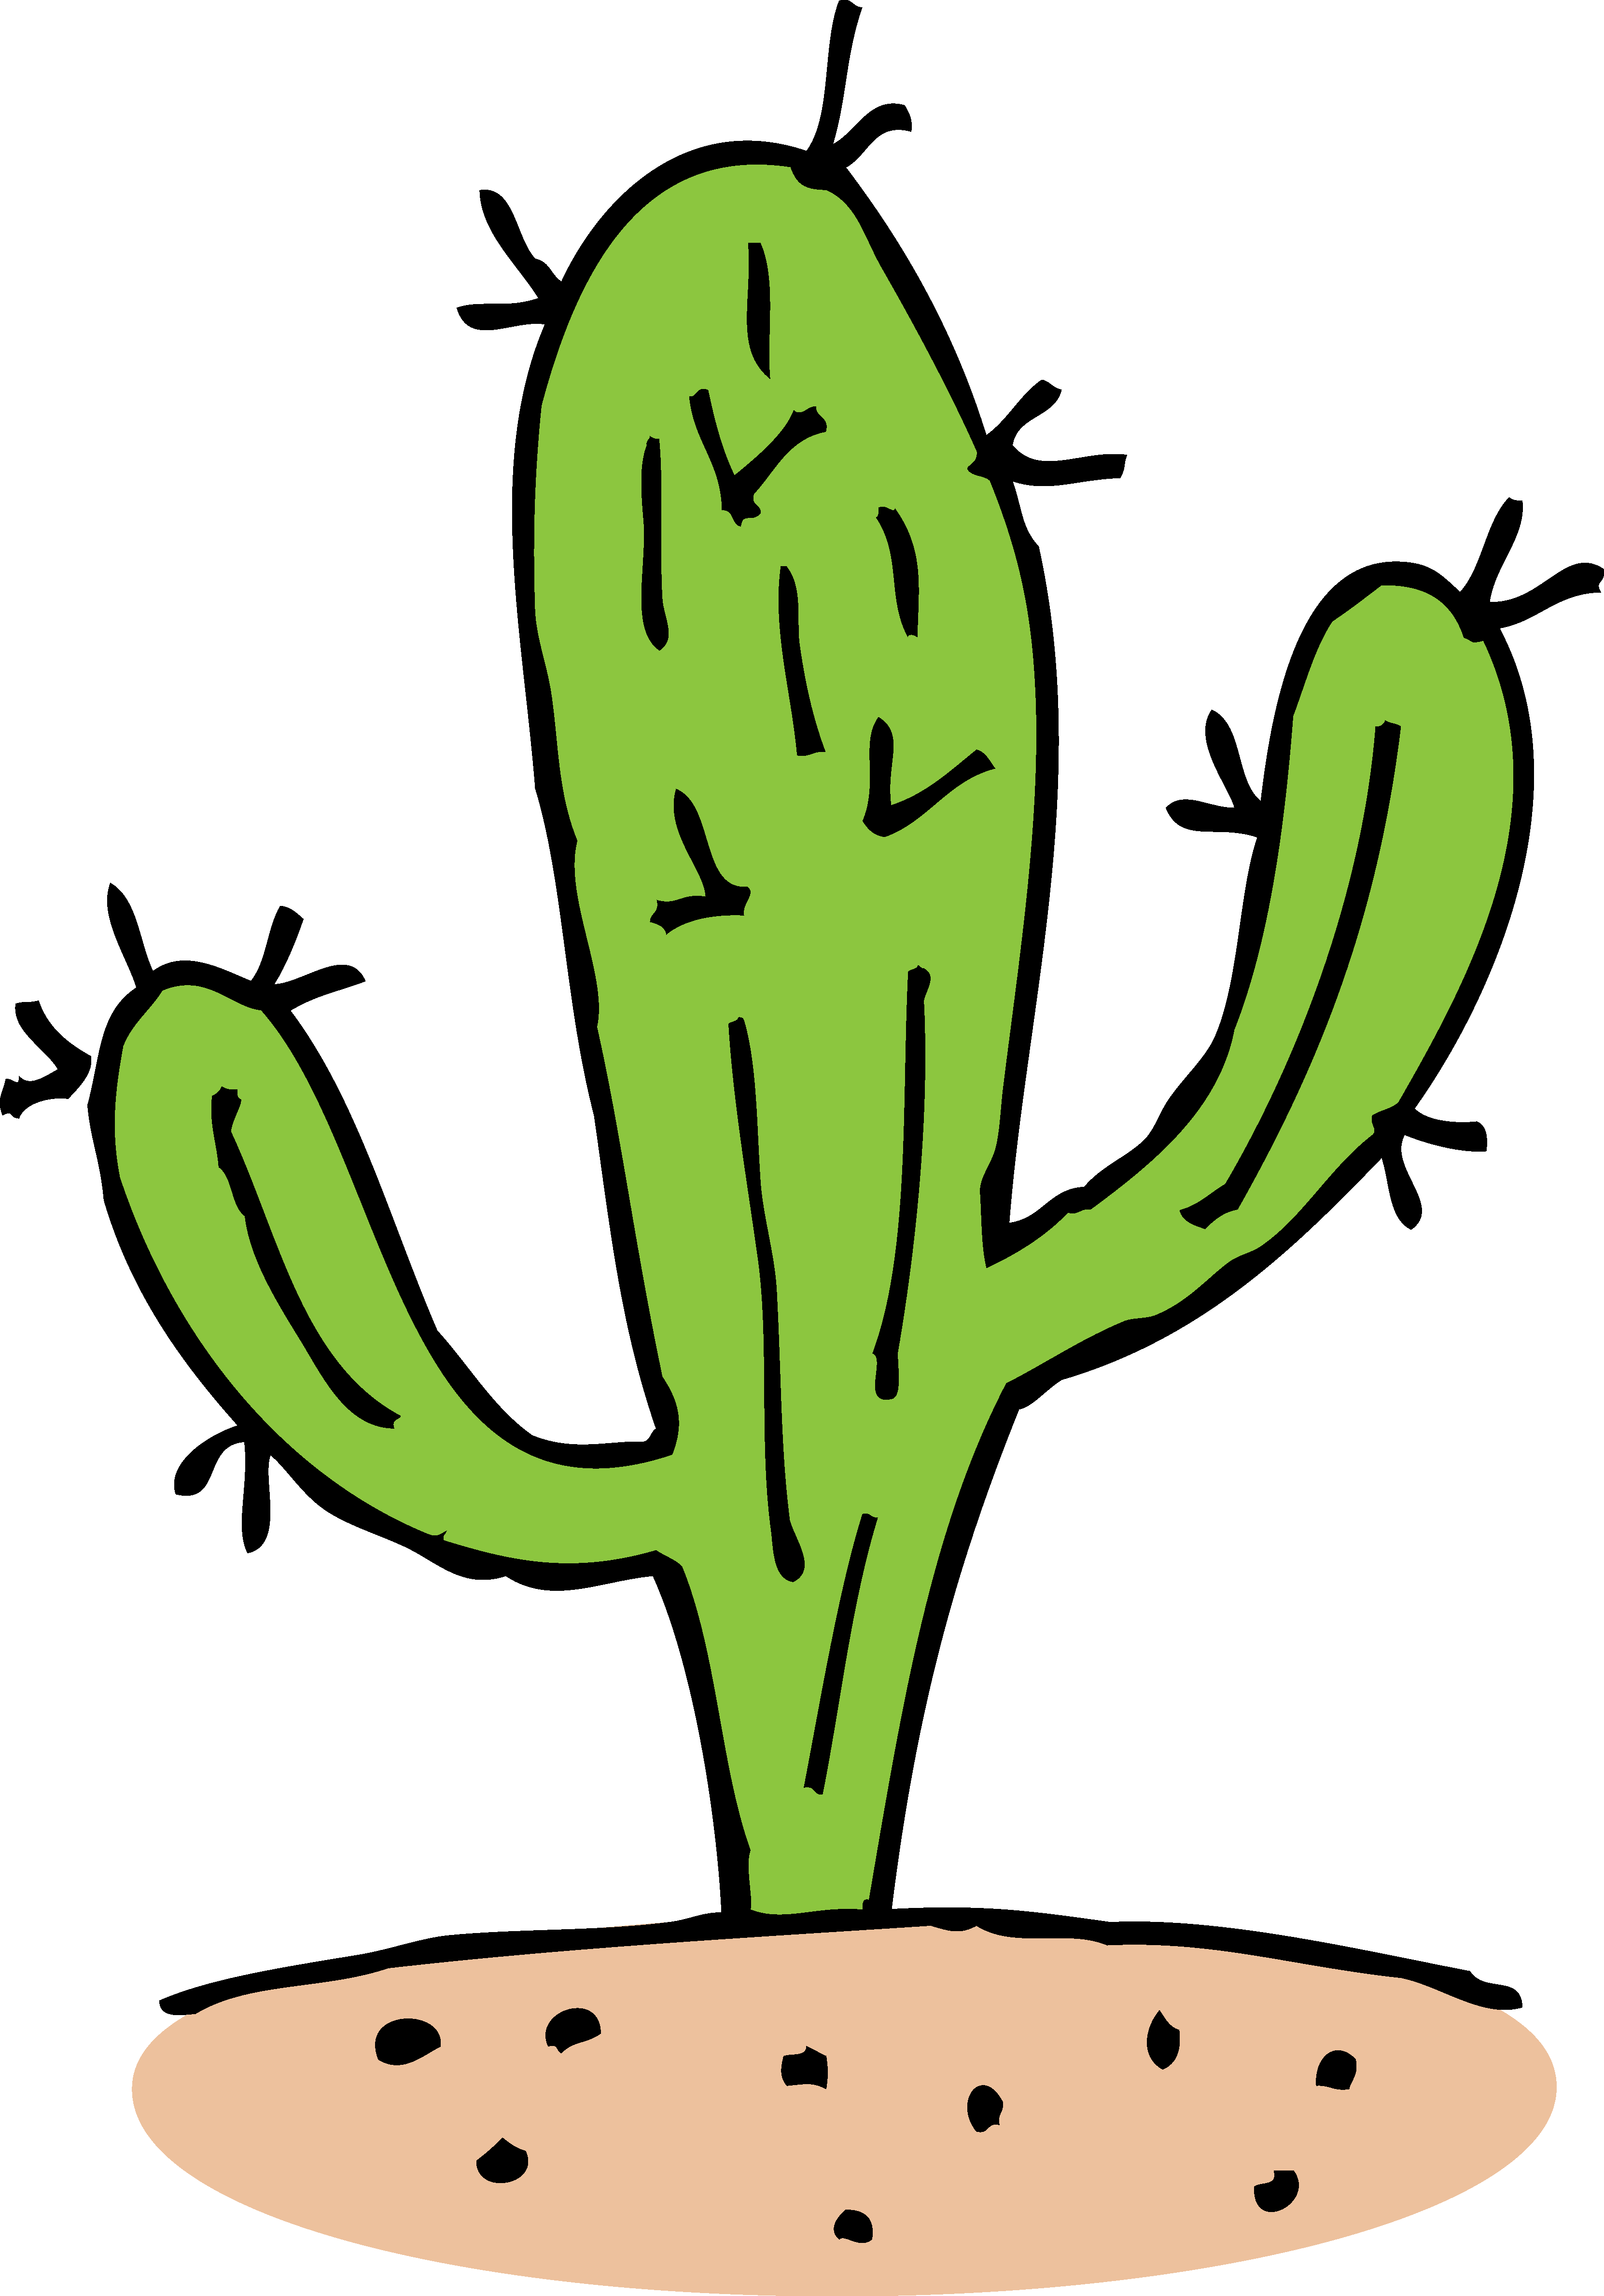 Free Animated Cactus Cliparts, Download Free Clip Art, Free